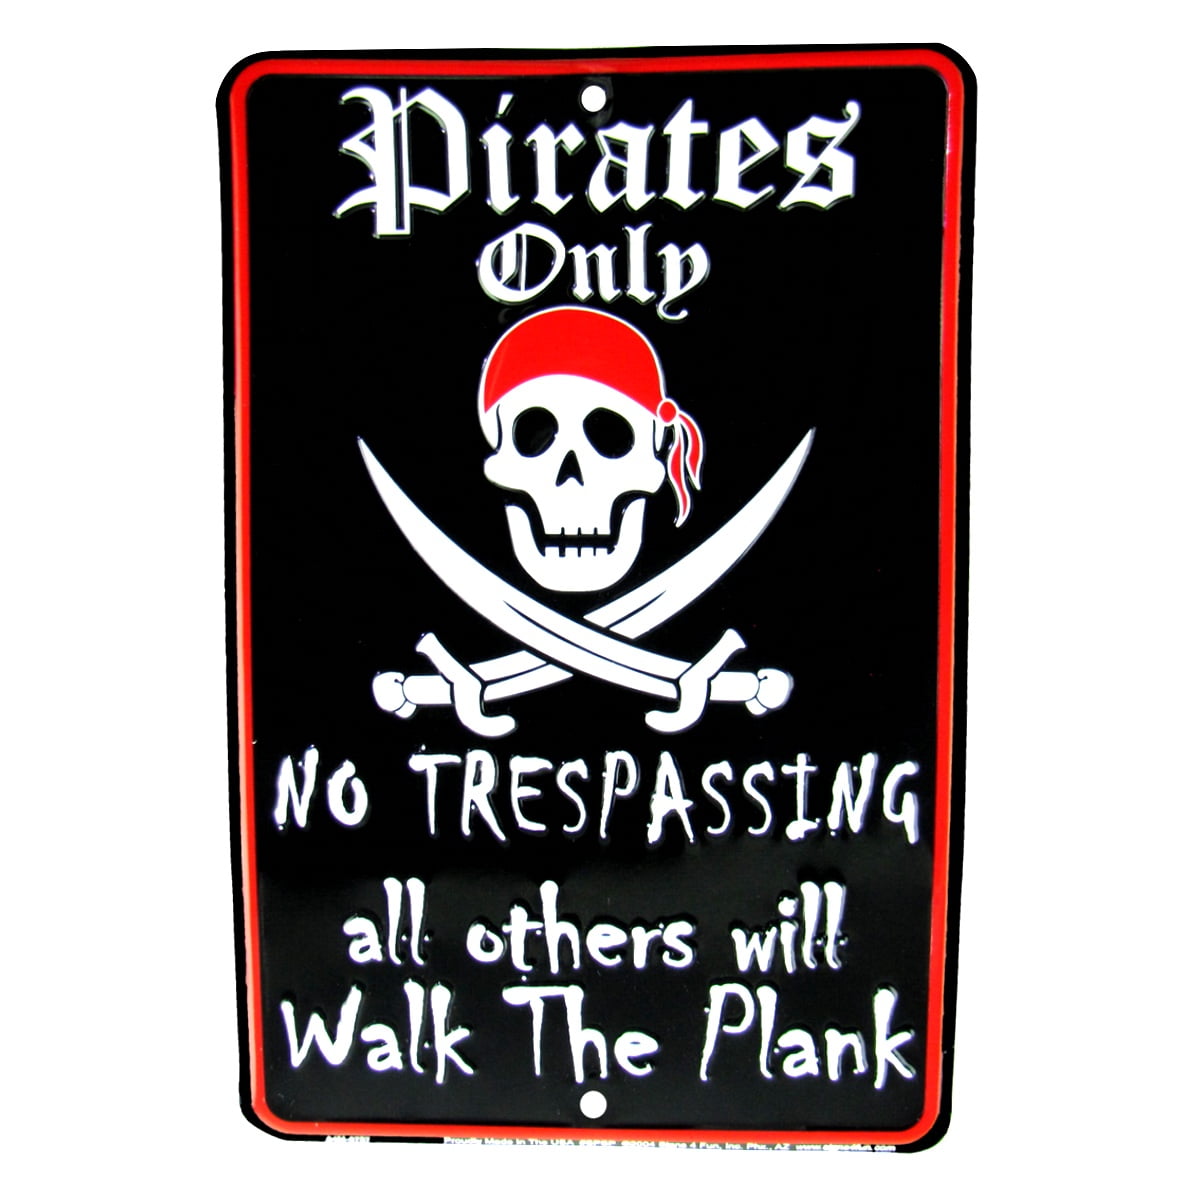 Raise The Jolly Roger 12" Round Metal Sign Novelty Pirate Home Wall Decor 